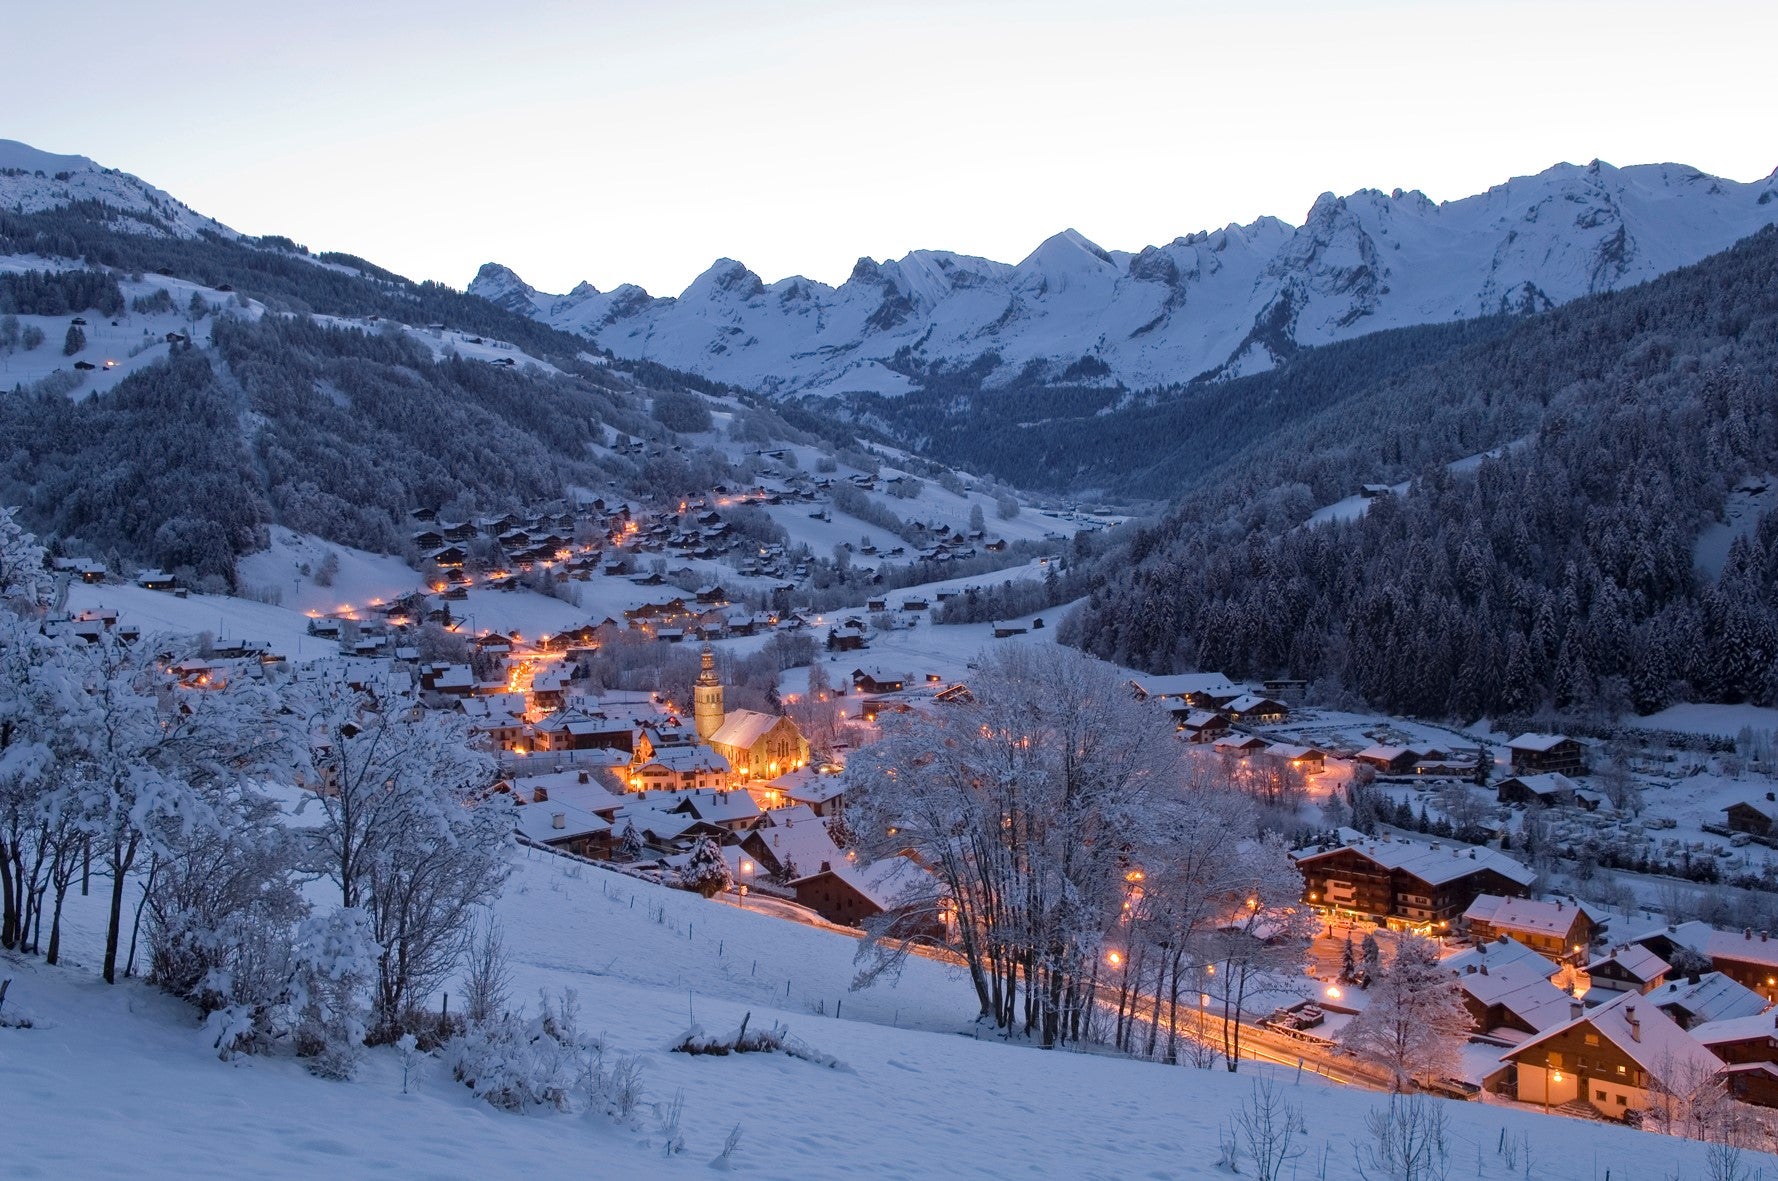 Charming Le Grand Bornand has a covered market, 19th-century church and an ice-skating rink